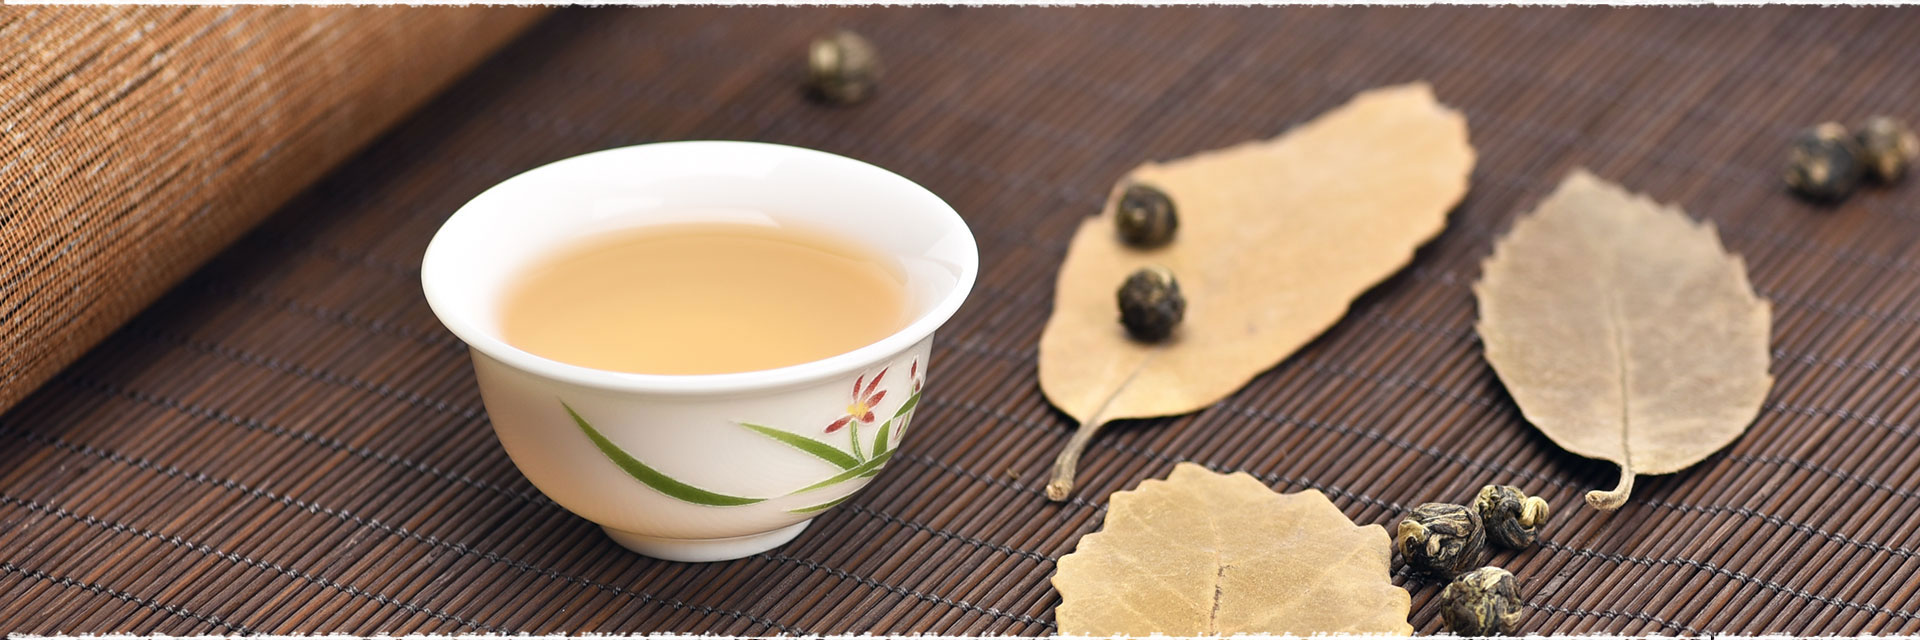 Can I drink green tea during pregnancy?